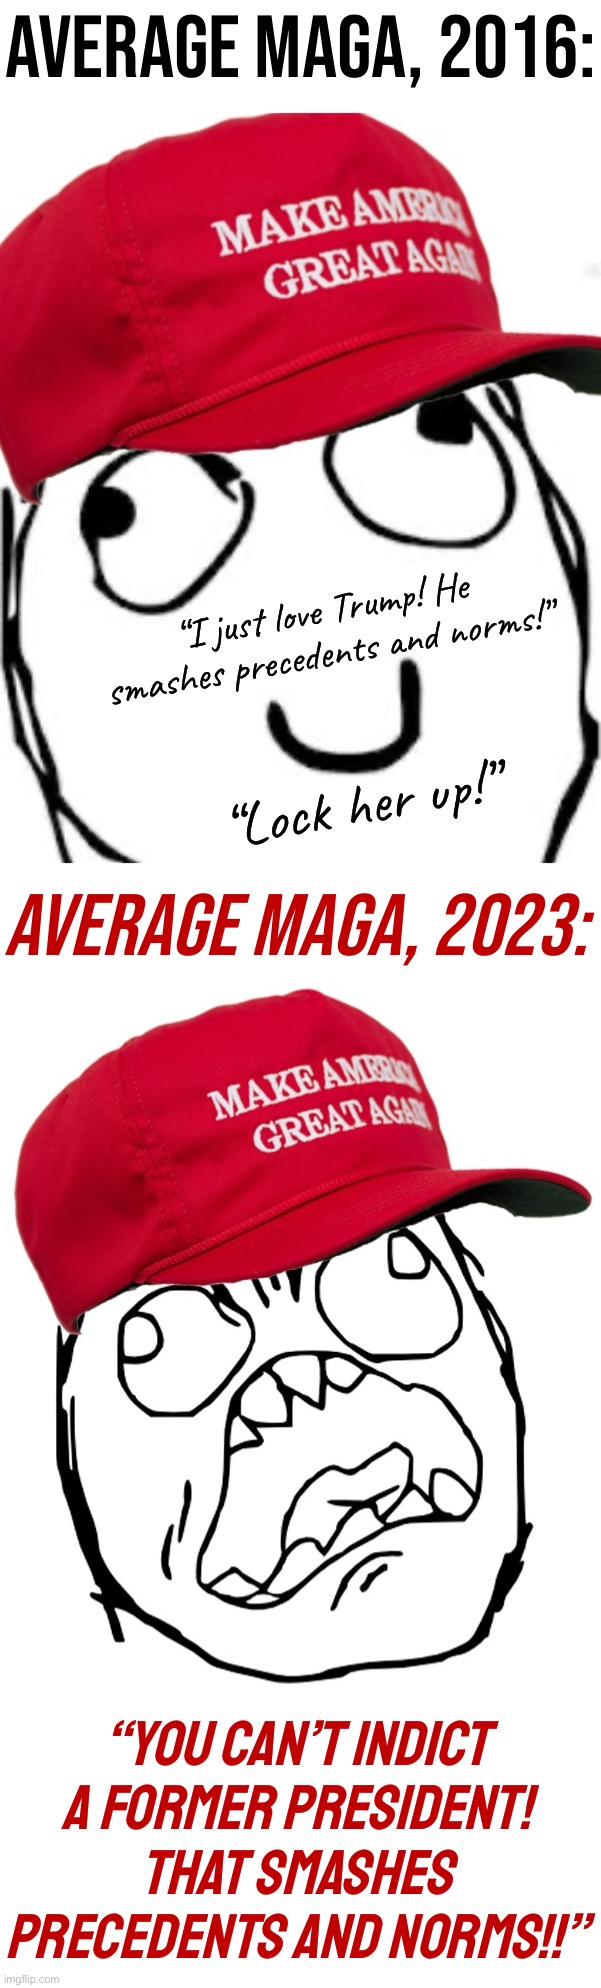 Norm-busting is a two-way street! |  AVERAGE MAGA, 2016:; “I just love Trump! He smashes precedents and norms!”; “Lock her up!”; AVERAGE MAGA, 2023:; “YOU CAN’T INDICT A FORMER PRESIDENT! THAT SMASHES PRECEDENTS AND NORMS!!” | image tagged in maga derp rage face,maga angry rage face,maga,trump 2016,trump 2024,trump supporters | made w/ Imgflip meme maker